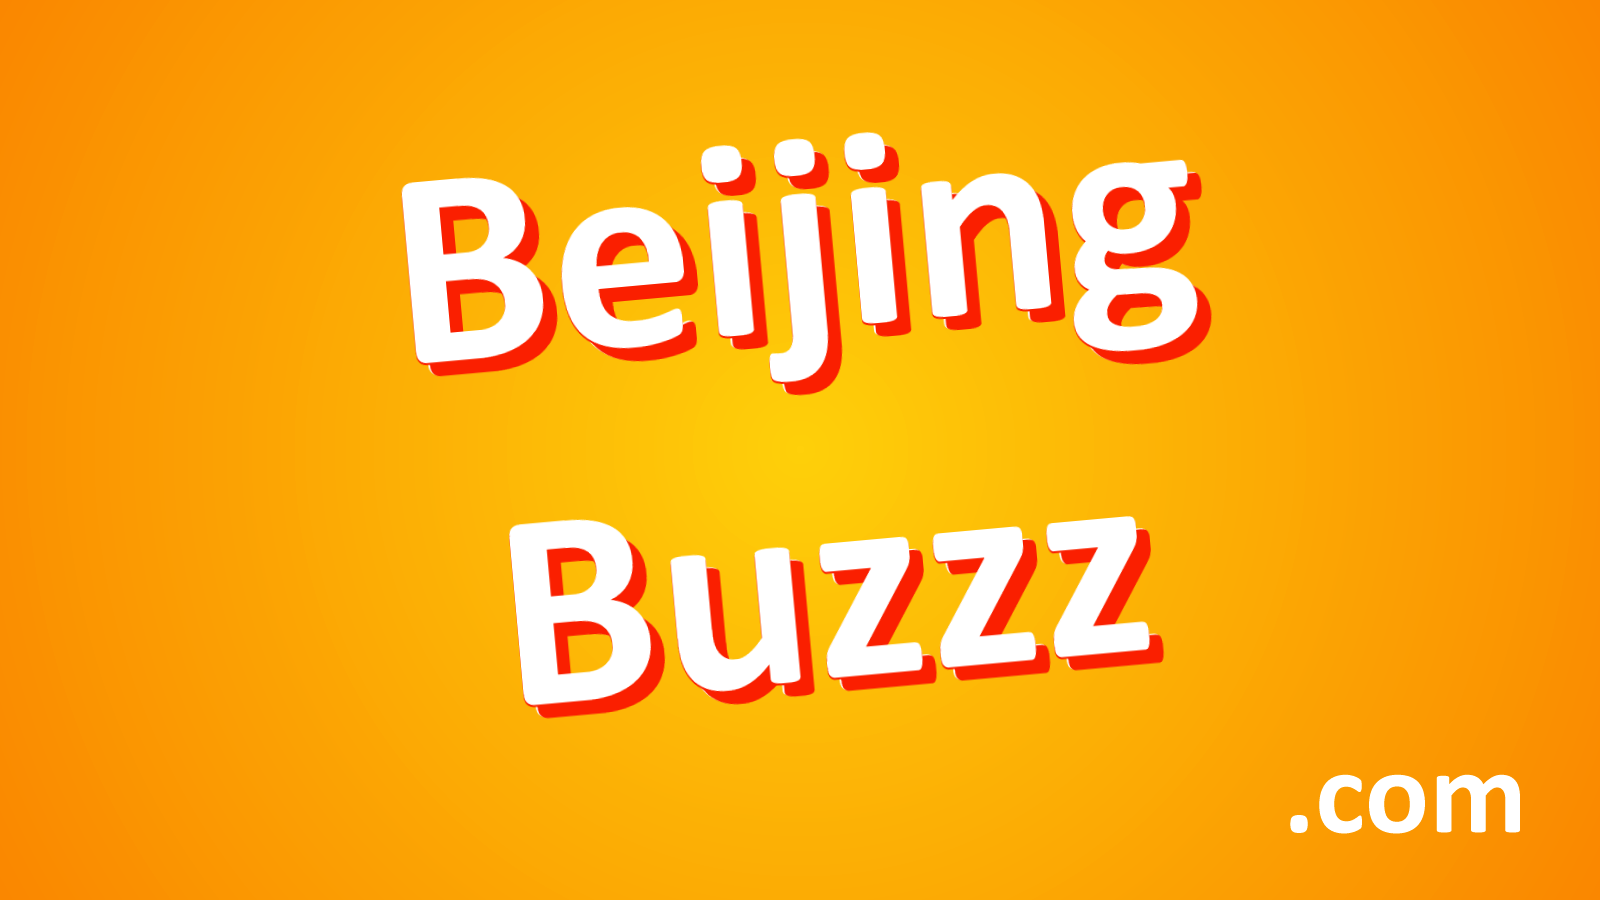 Get ready for China – great food dishes. In BeiJing alone, there are around 200,000 places to eat, so you`ll never be far from a tasty meal and there is so much to try that China is very much a foodie heaven.    Here`s BeiJingBuzzz`s cheat sheet of popular food dishes that you will love. Feel free to print out for personal use ...    Huo Guo (火锅) : `Hotpot` - order what you like and cook it in a steaming broth that can be spicy, mild or both. Served with a  sesame sauce topped with coriander and / or spring onion; with vinegar and soy sauce as additional options. Thinly sliced meats, all manner of vegetables, noodles, eggs, tofu and more. Be sure to try Dong Dofu (iced tofu) and Dofu skin - super delicious in Huo Guo. There are many independents but you cannot go wrong if you see a XiaBu XiaBu, a very popular restaurant chain.    Mābo Dōfu (麻婆豆腐) : soft beancurd in a spicy sauce with minced pork    BaoZi (包子) : steamed buns filled with meat or vegetables    JiaoZi (饺子) : boiled or pan-fried dumplings filled with meat or vegetables    RouJiaMo (肉夹馍) : a sandwich made with flatbread and filled with meat (most commonly pork)    CongYou Bing (葱油饼) : spring onion / scallion pancakes - a savory flatbread made with scallions and flour    ZhengJiao (蒸饺) : steamed or pan-fried dumplings filled with meat or seafood    ZongZi (粽子) : glutinous rice dumplings wrapped in bamboo leaves    GouBuLi BaoZi (狗不理包子) : steamed buns filled with meat or vegetables, popular in Tianjin    DouHua (豆花) : sweet tofu pudding    XiaoLongBao (小笼包) : steamed dumplings filled with meat or seafood and soup    Xī Hóng Shì Chǎo JīDàn (西红柿炒蛋): egg and tomato - a popular dish in Chinese cuisine, it is often a simple and comforting dish, that can be found in many Chinese home-style cooking. It is typically made by stir-frying diced tomatoes and beaten eggs together with some seasonings, such as salt, pepper, and sometimes soy sauce.    DanDan Mian (担担面): a spicy Szechuan noodle dish made with thin wheat noodles, a spicy chili oil-based sauce, and often ground meat    JianShui Zhu (建水煮): fried vermicelli noodles popular in Yunnan province    LanZhou LaMian (兰州拉面): hand-pulled noodles popular in Lanzhou, Gansu province    ReGan Mian (热干面): Wuhan hot dry noodles - a spicy dish made with thin wheat noodles, chili oil and ground meat, popular in Wuhan, Hubei province    ZhaJiang Mian (炸酱面): a dish of thick wheat noodles served with a fermented soybean paste sauce and vegetables, popular in northern China    ZhaJiangMian (炸酱面): a dish of thick wheat noodles served with a bean paste sauce, popular in northeastern China    GuoTie (锅贴): Chinese fried dumplings    MaLaTang (麻辣烫): a spicy hotpot popular in Sichuan and Chongqing    Di San Xian (第三鲜): a popular dish in Chinese cuisine, typically found in northern China, it is a type of stir-fry dish made with three main ingredients: potatoes, eggplant, and bell peppers, it is also called `Three Fresh` or `Three Precious Vegetables`. It is typically stir-fried with garlic, ginger, and scallions, and seasoned with soy sauce, sugar, and sometimes oyster sauce.    GōngBǎo JīDīng (宫保鸡丁) : also transcribed Gong Bao, Kung Pao or Kung Po, is a spicy, stir-fried Chinese dish made with cubes of chicken, peanuts, vegetables, and chili peppers. A classic dish in Sichuan cuisine.    JīSī Liáng Miàn (鸡丝凉面) : Chinese Chicken Noodle Salad - Chinese chicken noodle salad features noodles tossed in a nutty savory sesame sauce and topped with shredded chicken and cucumber.    Hei Jiao Niu Liu (黑椒牛柳) - Sliced tender beef with onions, peppers and black pepper.    Huo Guo - hot pot    There are also around 6,000 McDonalds in China, plus Burger King, KFC, Pizza Hut, Subway and more. And if you like cooking from scratch yourself, you`ll find many huge supermarkets plus local markets.